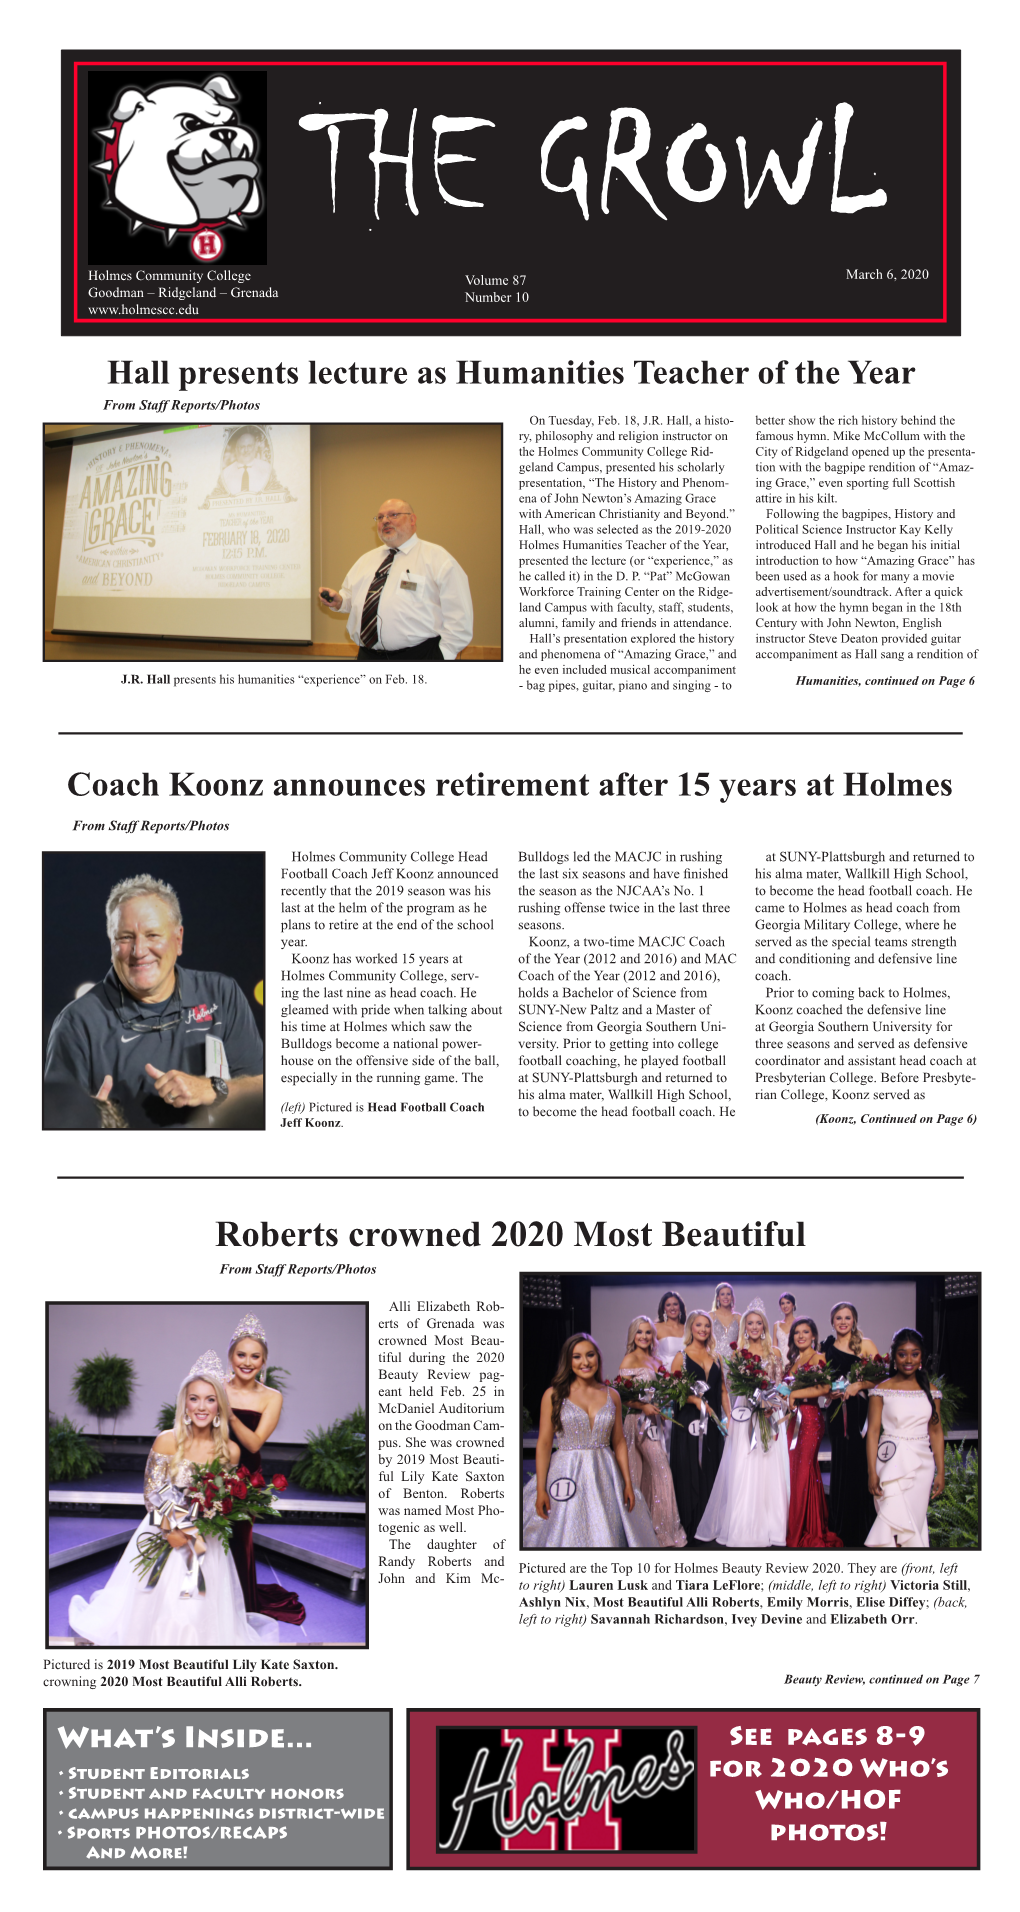 Roberts Crowned 2020 Most Beautiful from Staff Reports/Photos